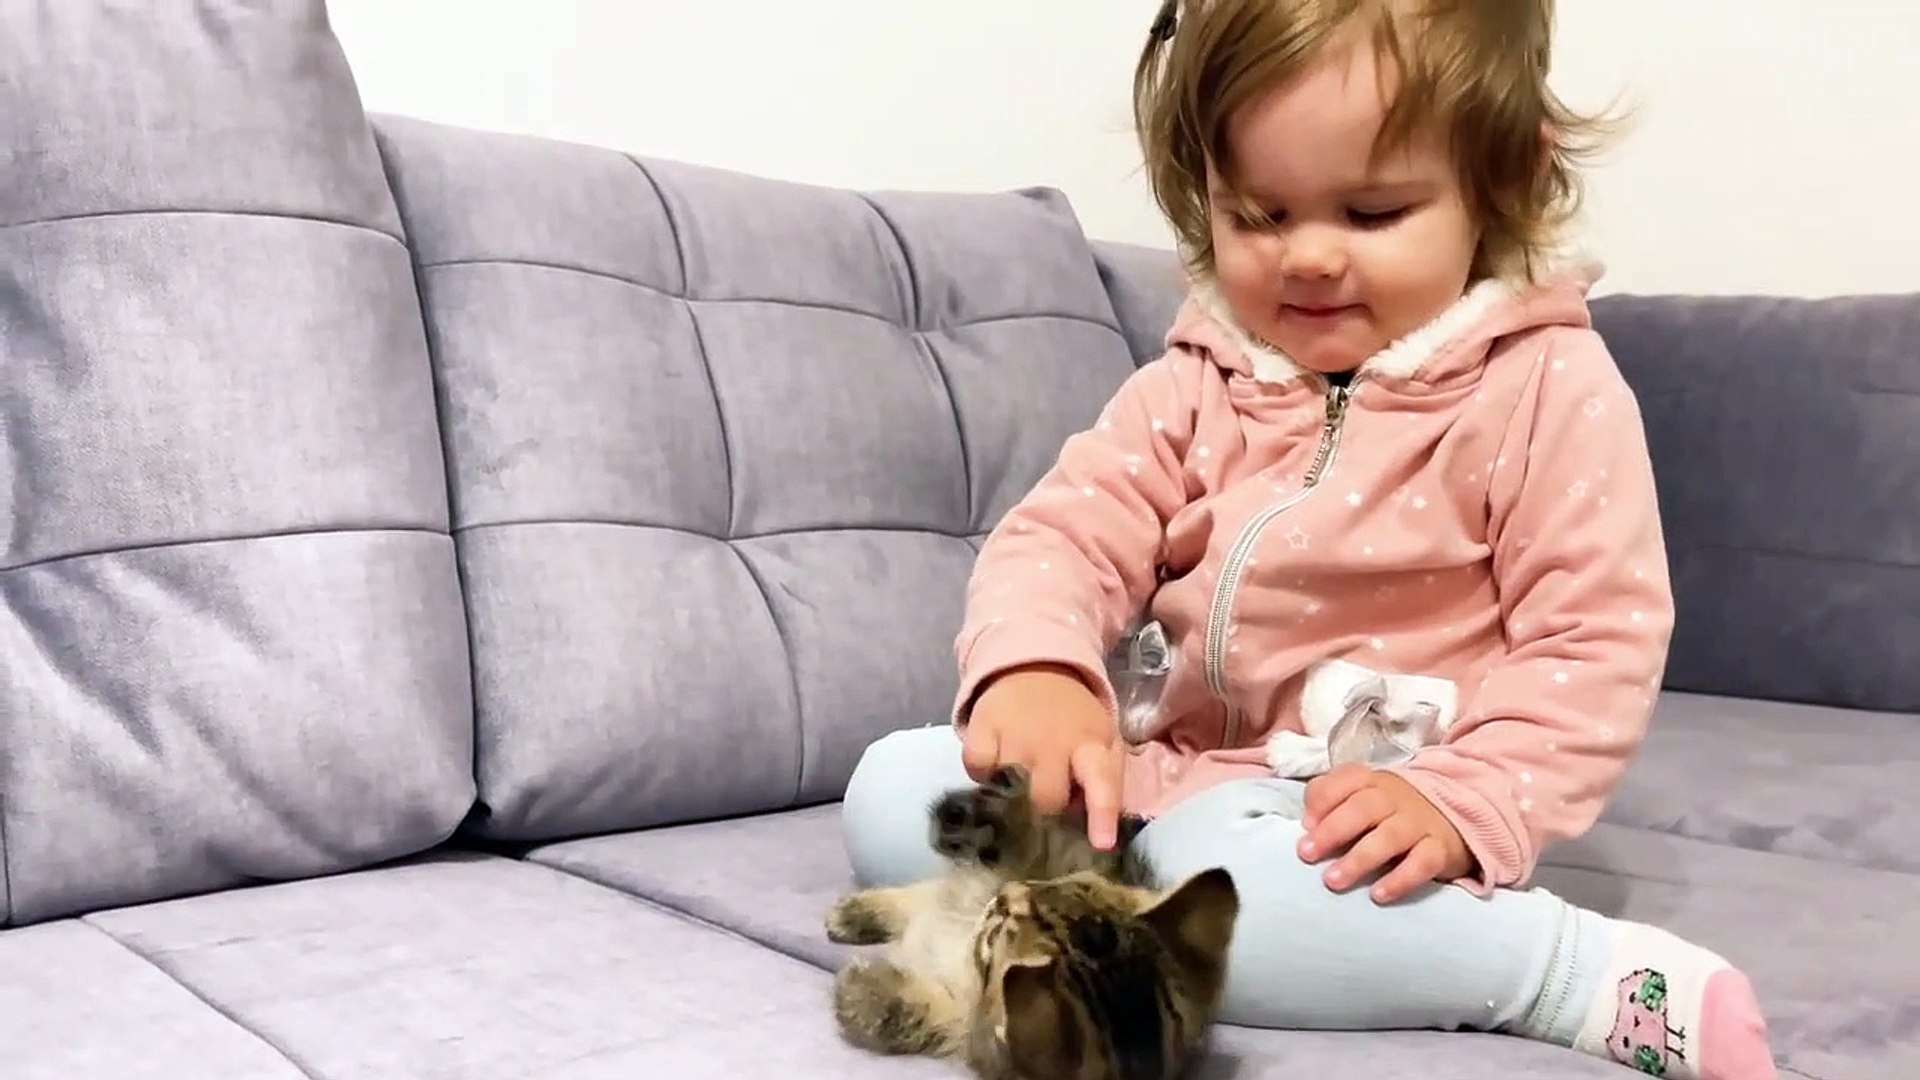 Cute Baby Meets New Baby Kitten for the First Time! - video Dailymotion